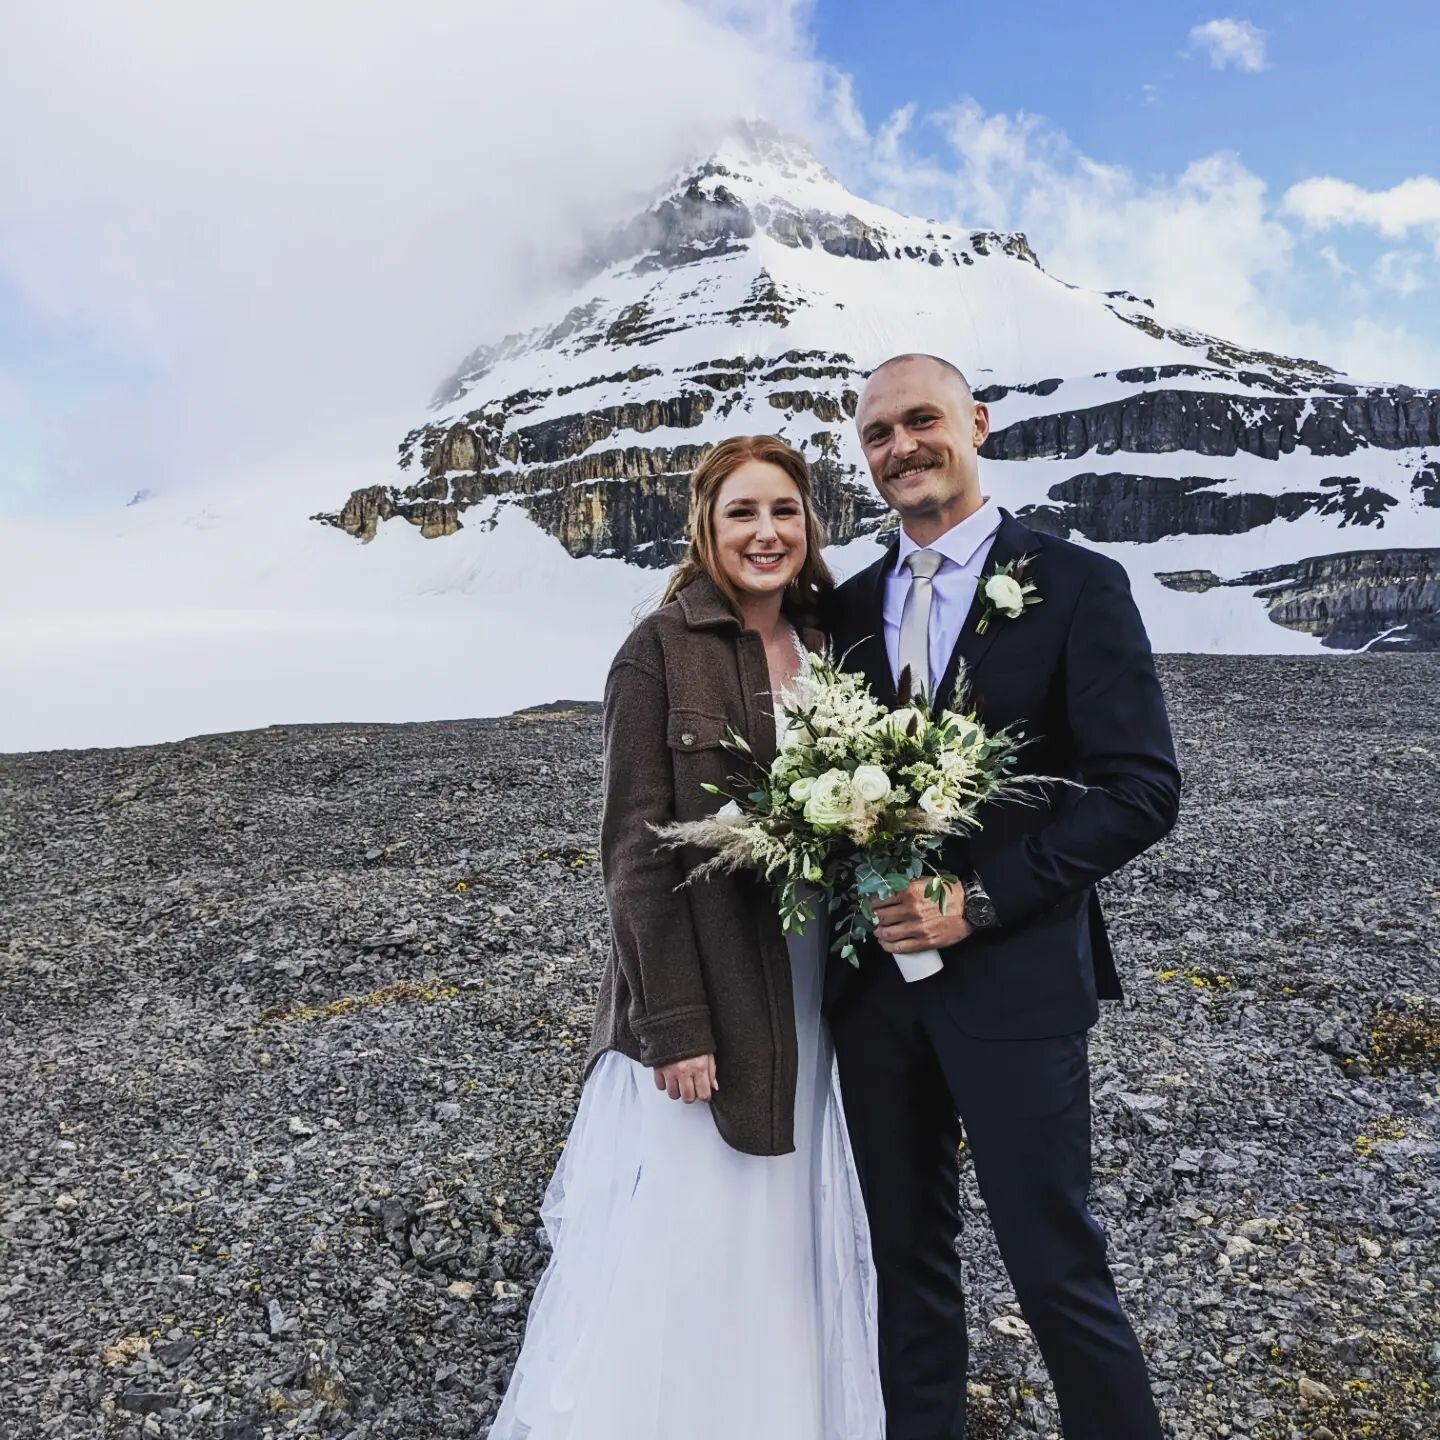 Sierra &amp; Cam
June 22, 2022

These two lovers were so amazing as we held their ceremony beside a glacier! I can't thank them enough for letting me be a part of their day. 🤍